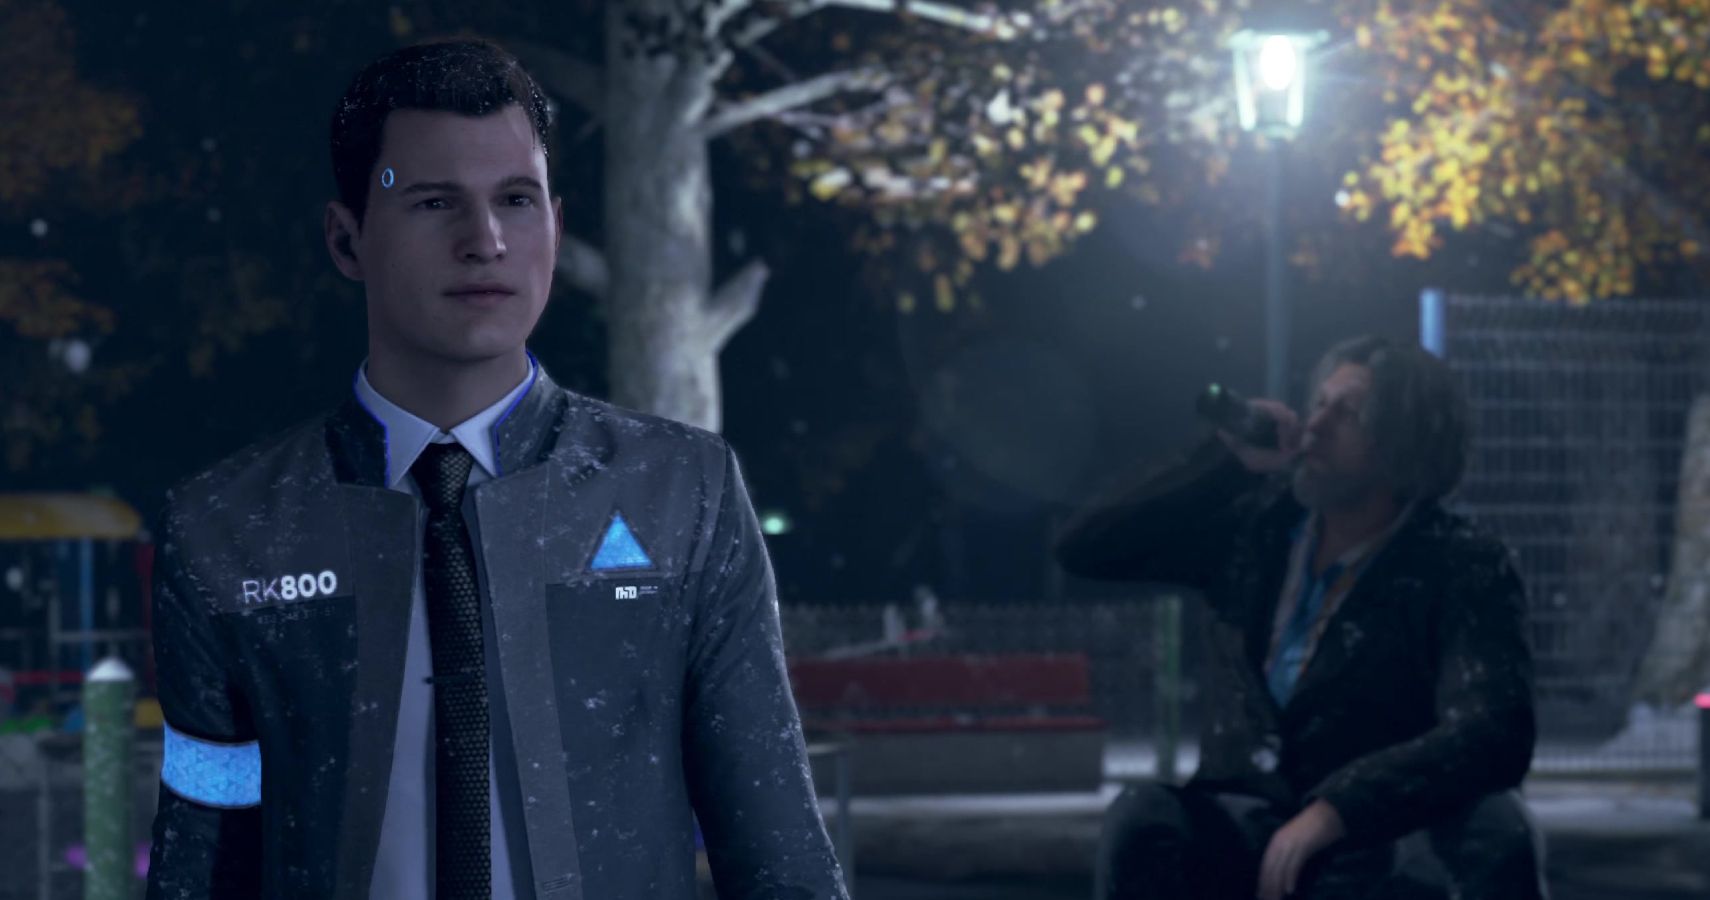 Connor and Hank from Detroit Become Human